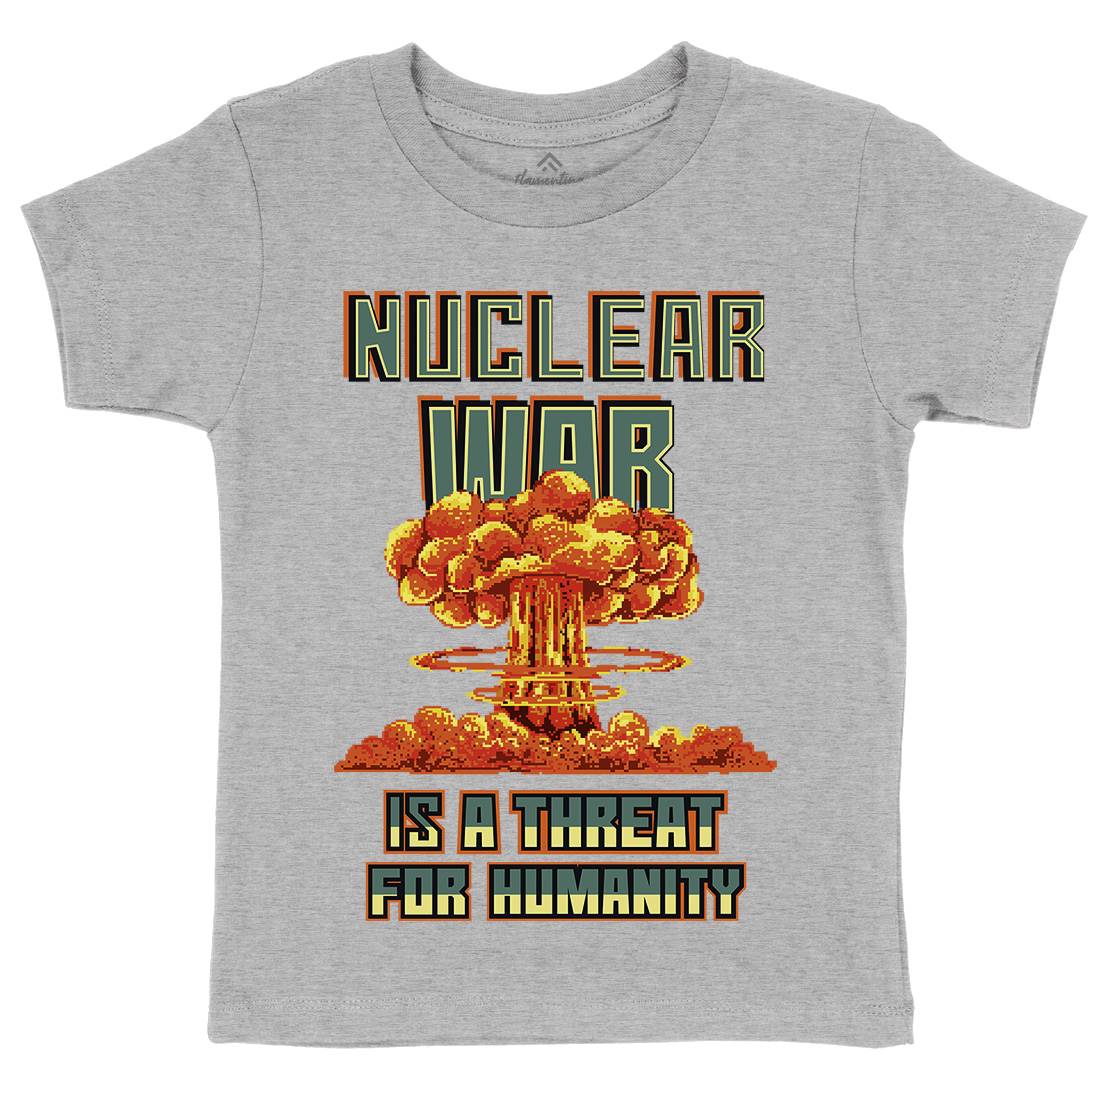 Nuclear War Is A Threat For Humanity Kids Organic Crew Neck T-Shirt Army B941